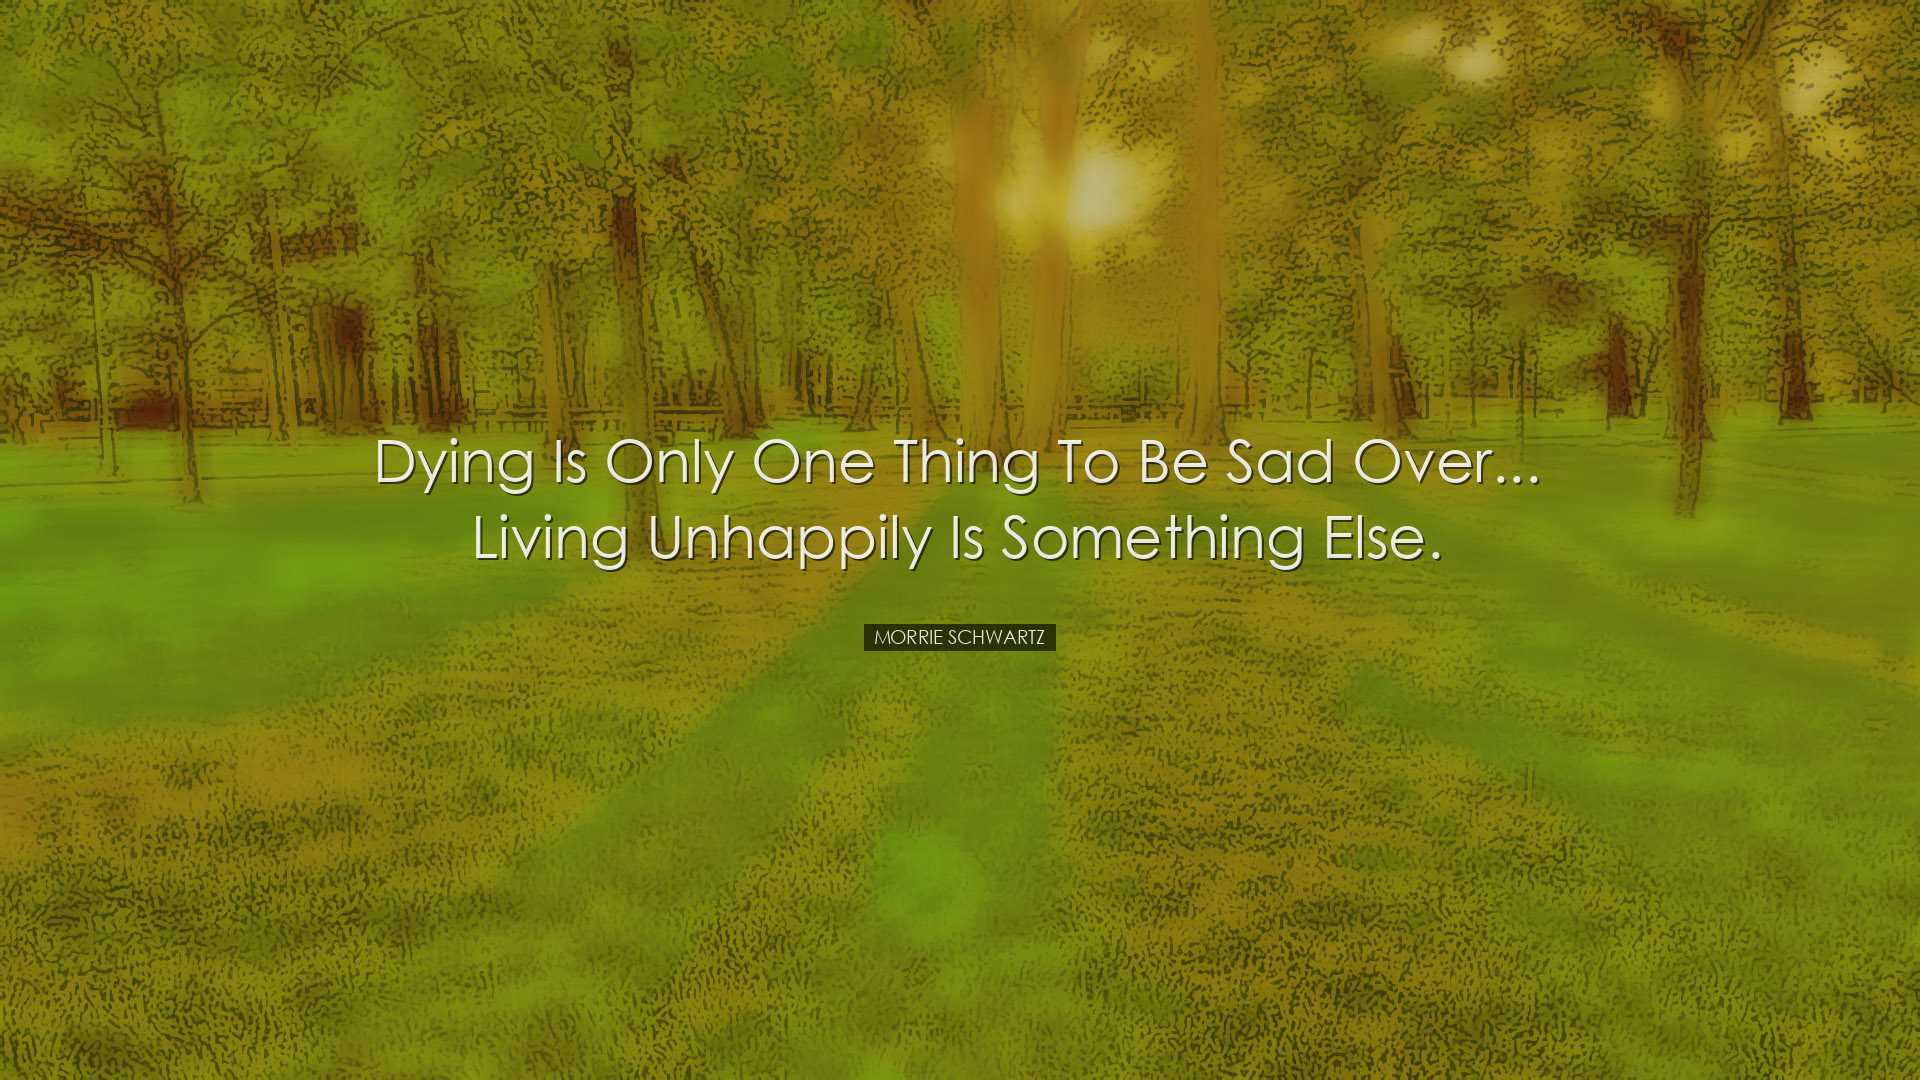 Dying is only one thing to be sad over... Living unhappily is some